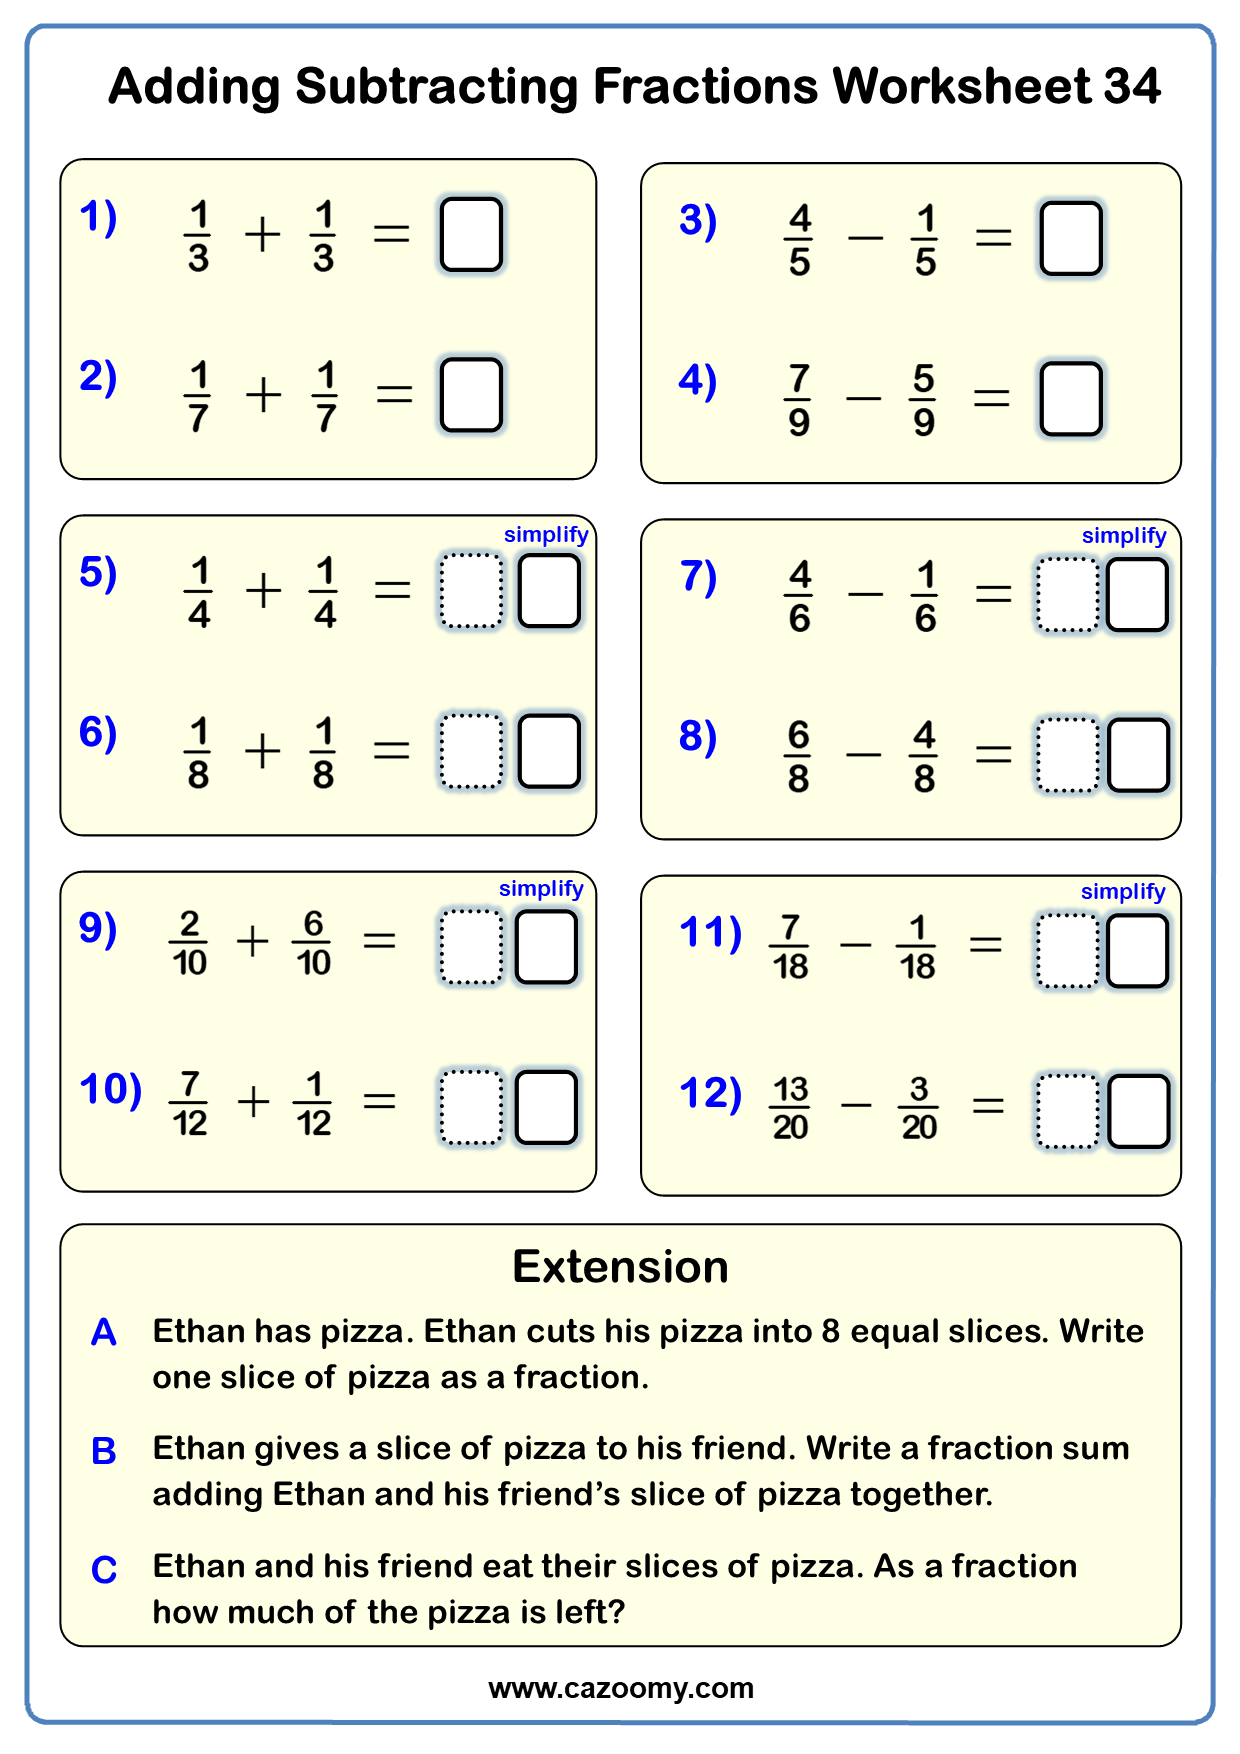 Adding Fractions Worksheets - New & Engaging  Cazoomy Regarding Adding Fractions Worksheet Pdf